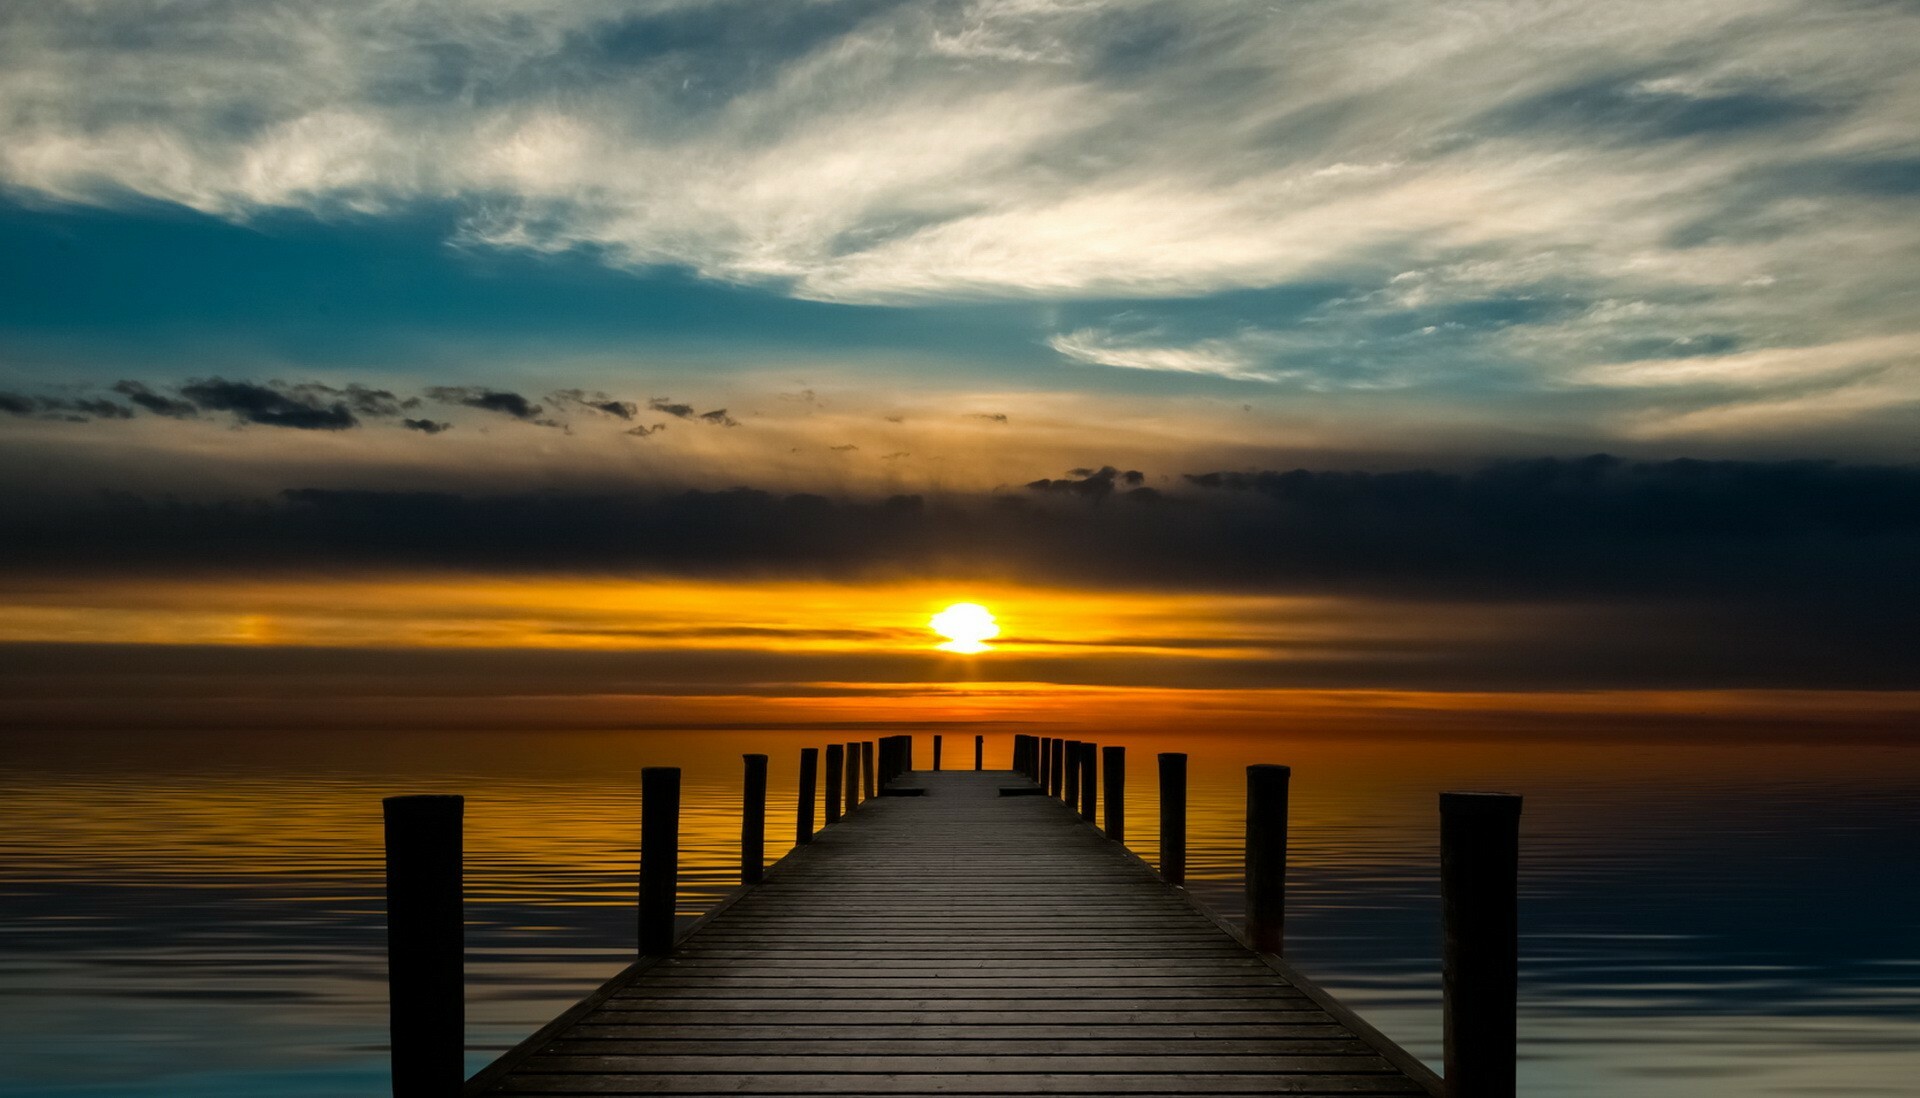 Clouds and sun, Pier by the sea, Tranquil scenery, Skyline silhouette, 1920x1100 HD Desktop